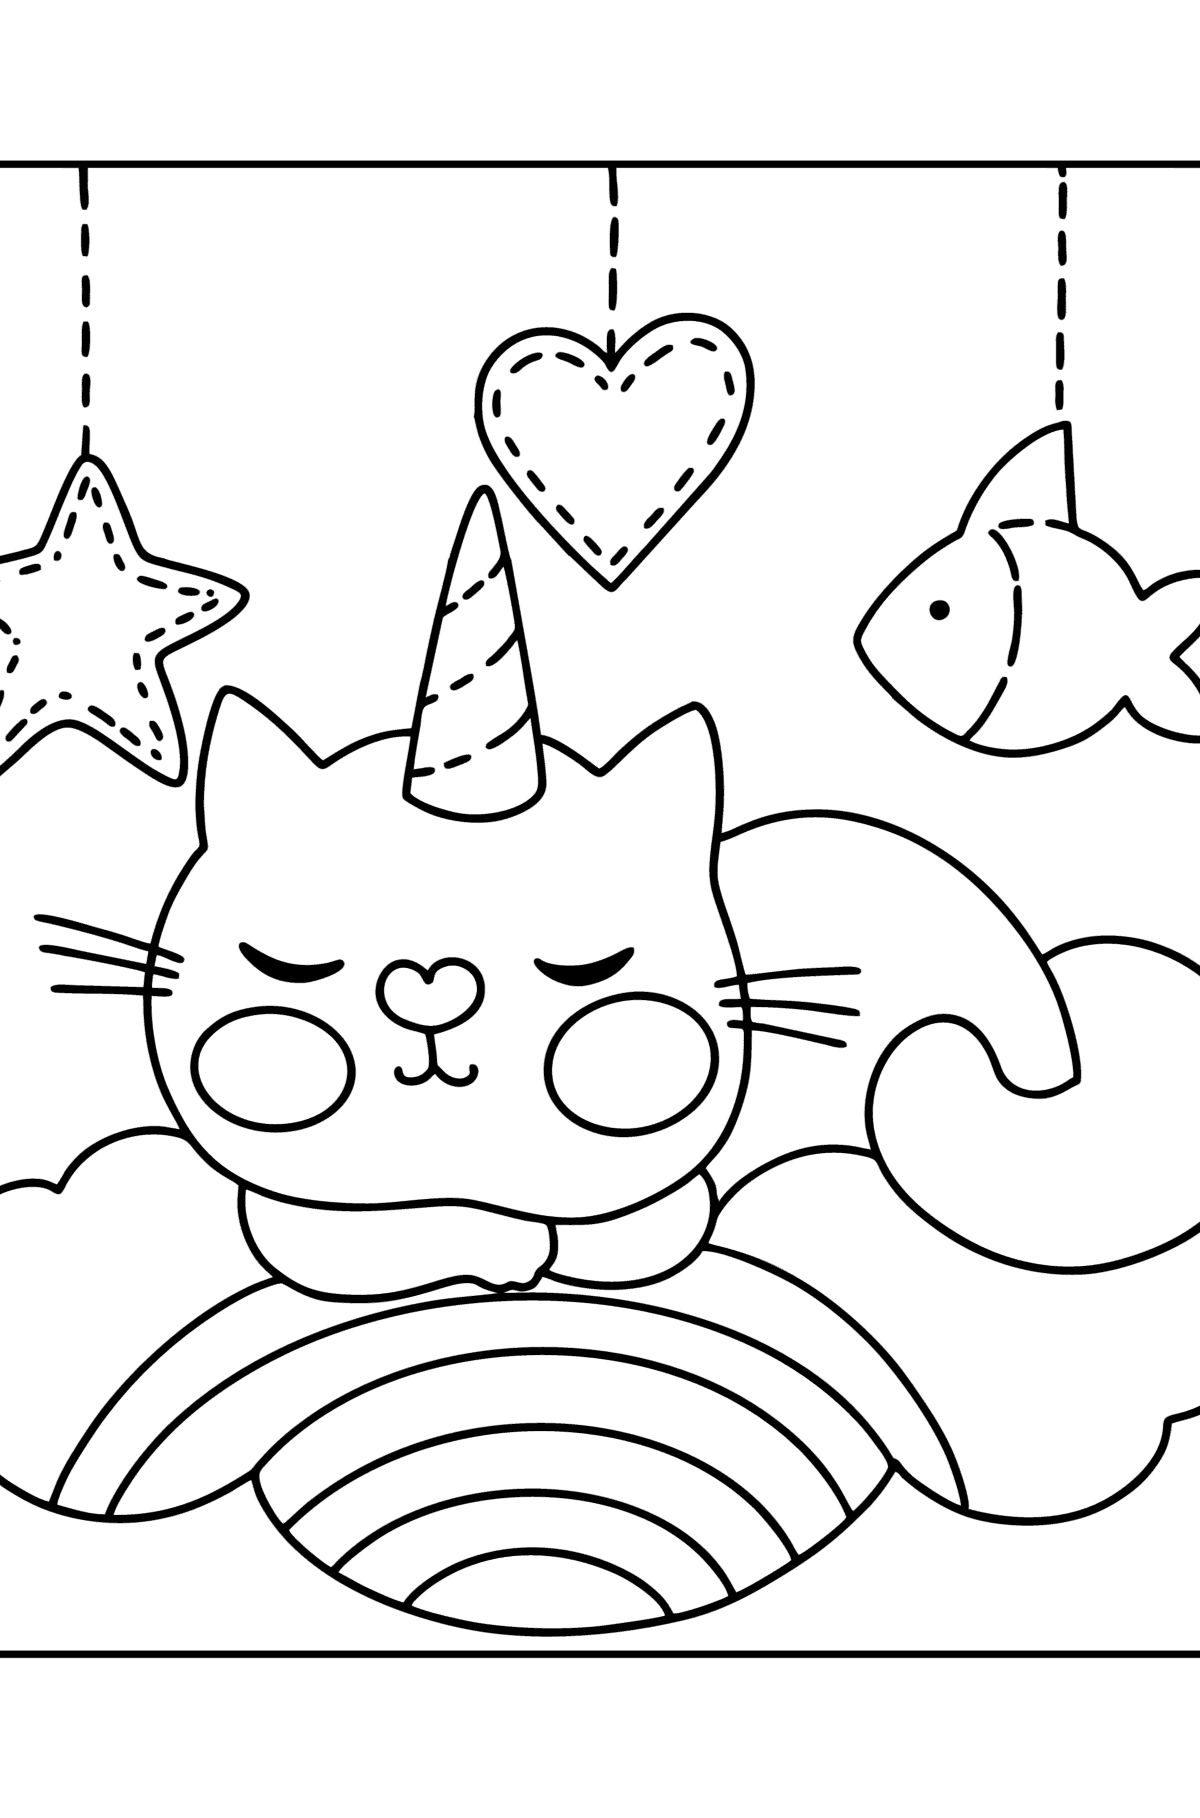 Cute cat unicorn coloring page - Coloring Pages for Kids